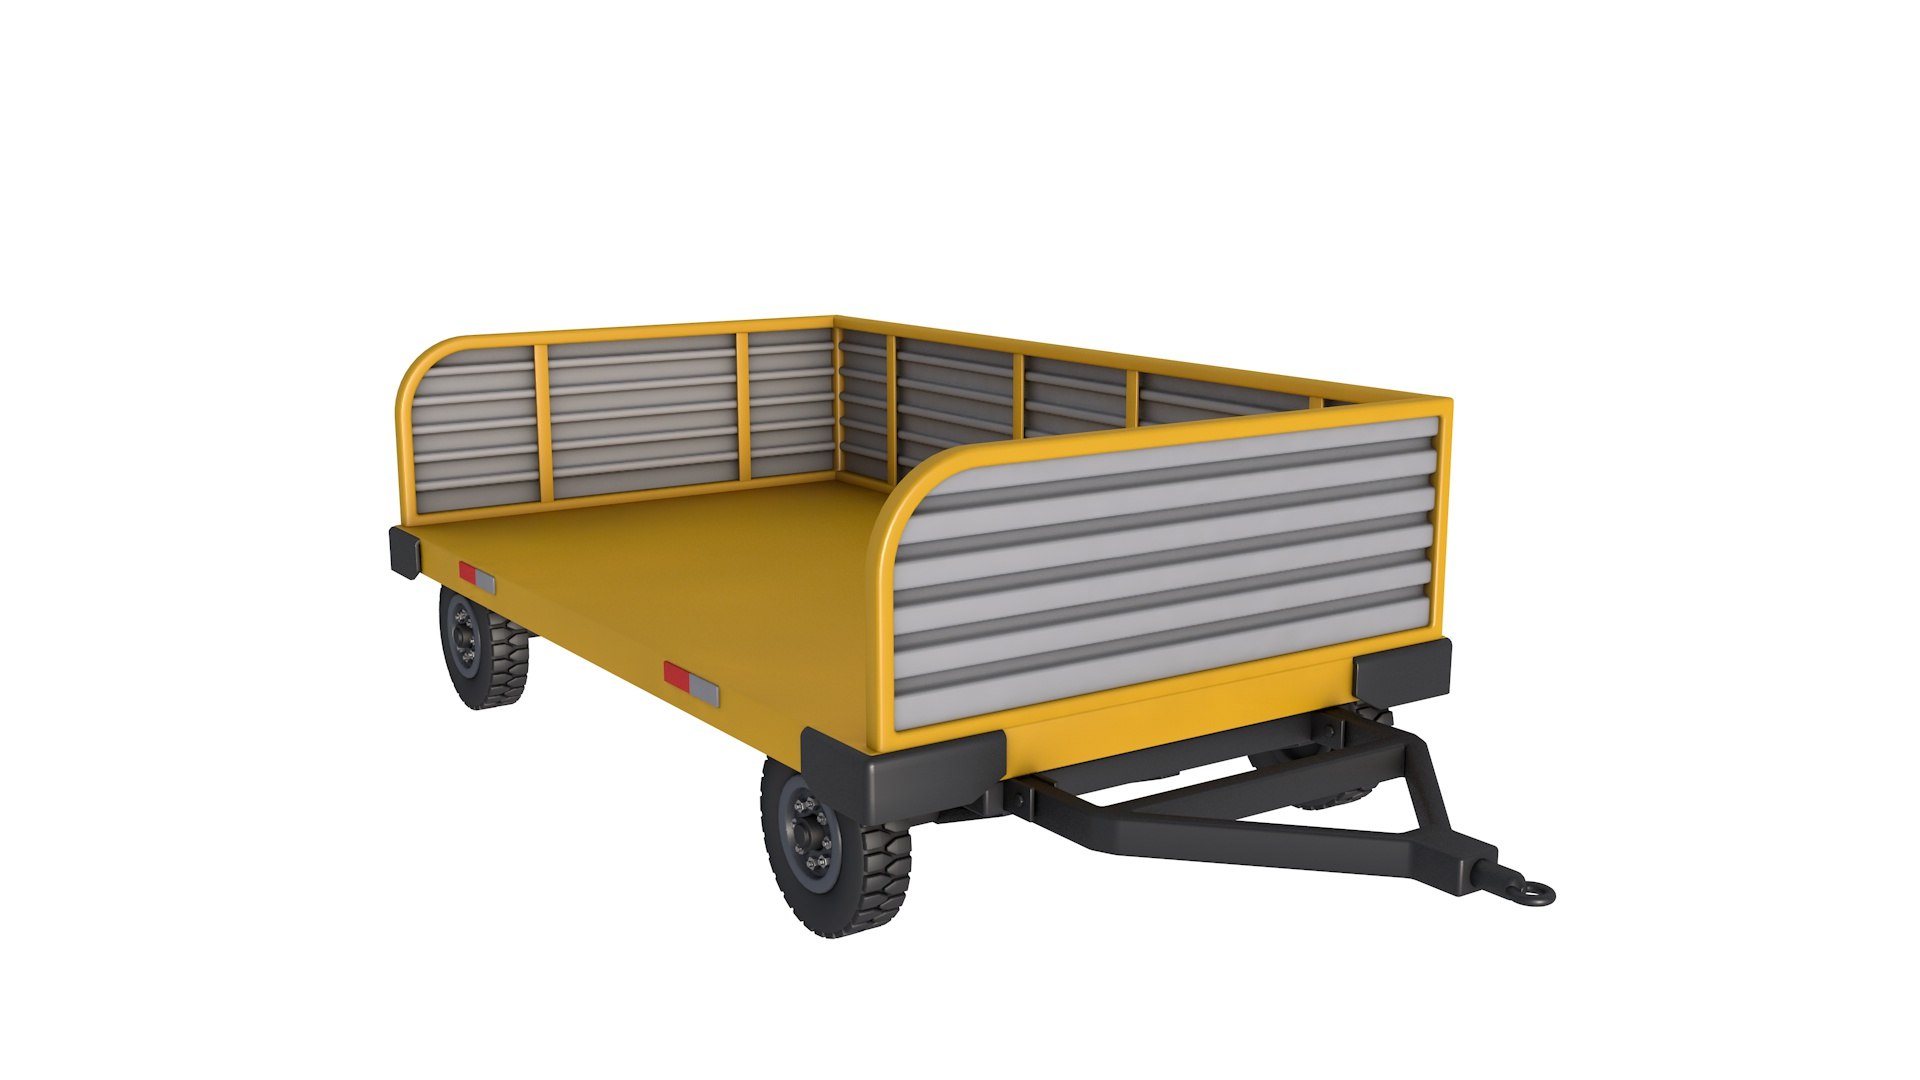 Airport Luggage Trolley 3D model - TurboSquid 2105749